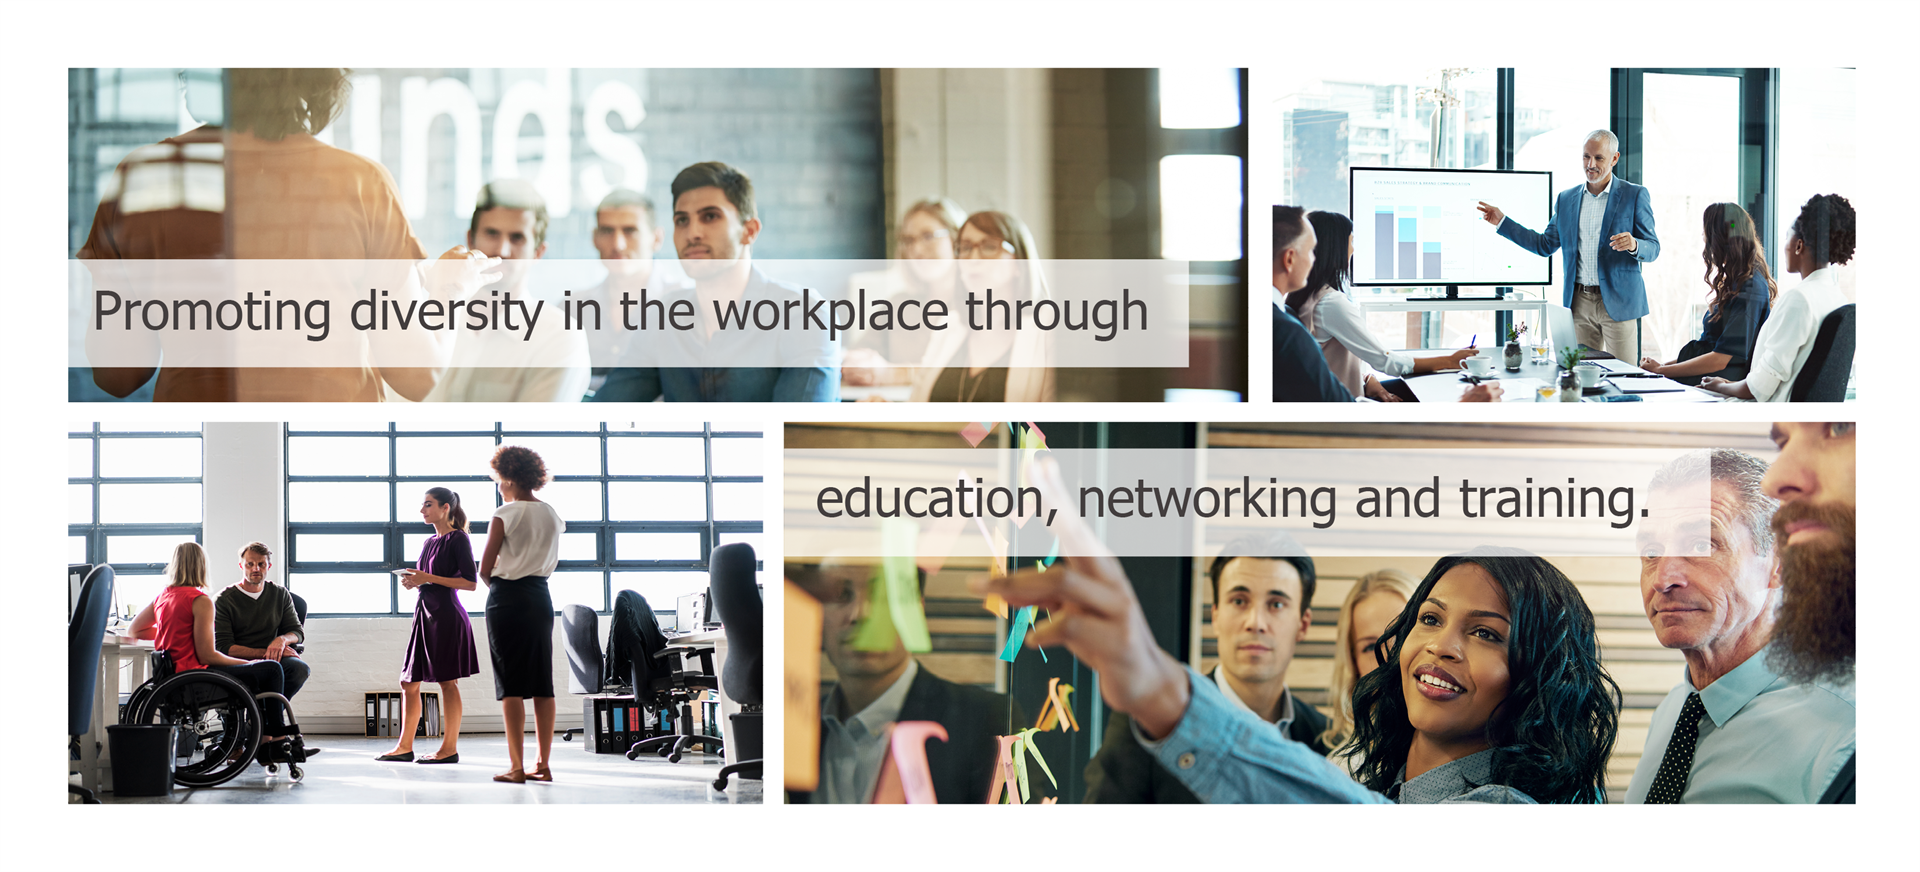 Promoting diversity in the workplace through education, networking and training.